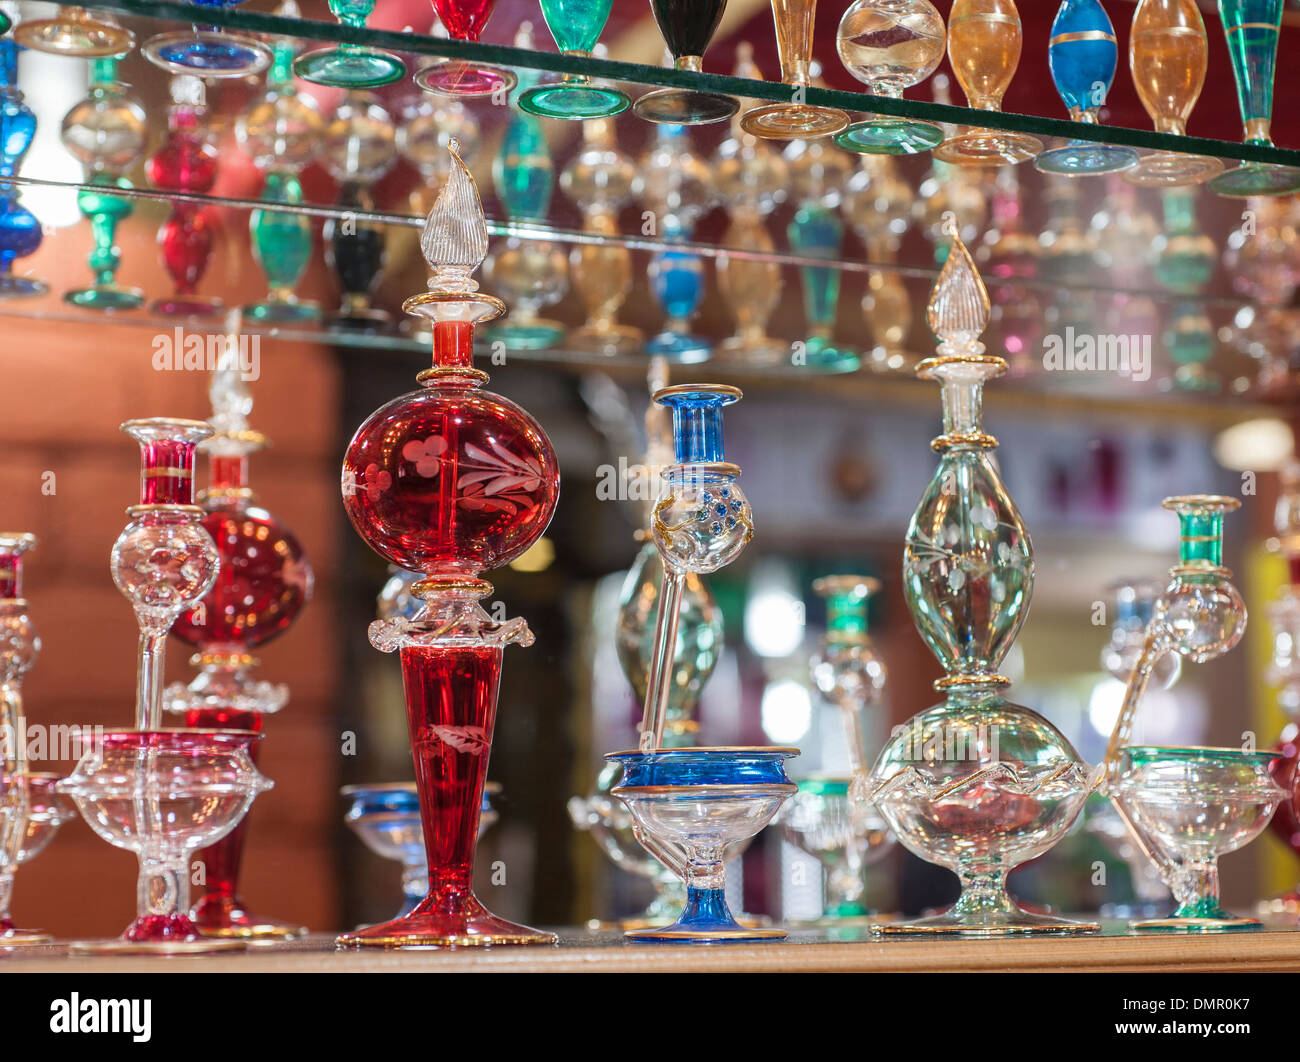 Rows of ornate multicolored perfume bottles on a shelf in egyptian bazaar shop Stock Photo